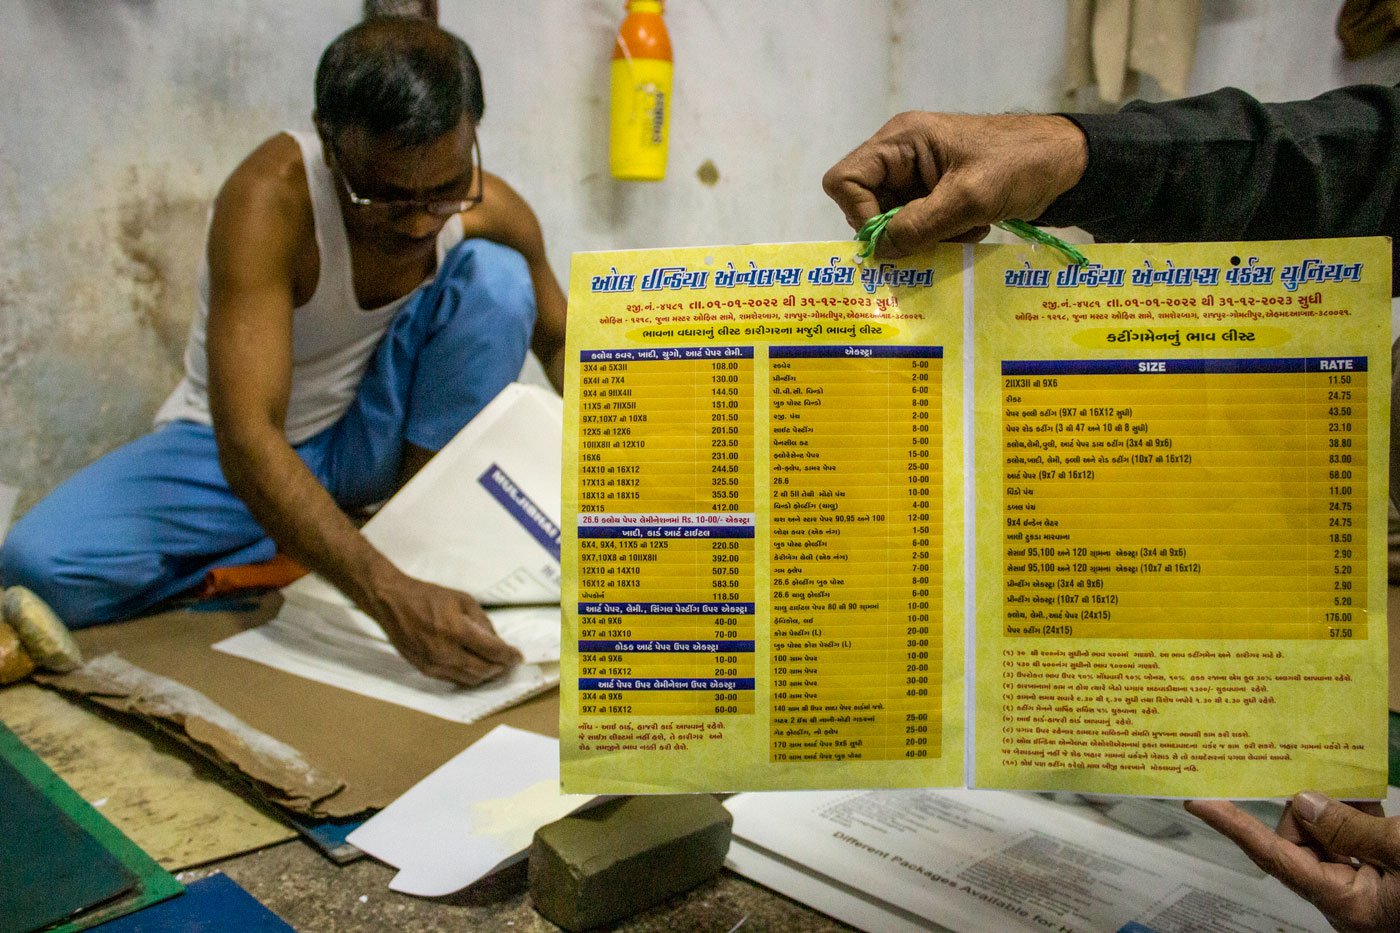 A photo of the document listing the increase in wages of artisan labour between January 1, 2022 to December 31, 2023, prepared after discussion between the two unions, of workers and manufacturers in Ahmedabad. In 2022, cover-craft prices were increased by 6 per cent